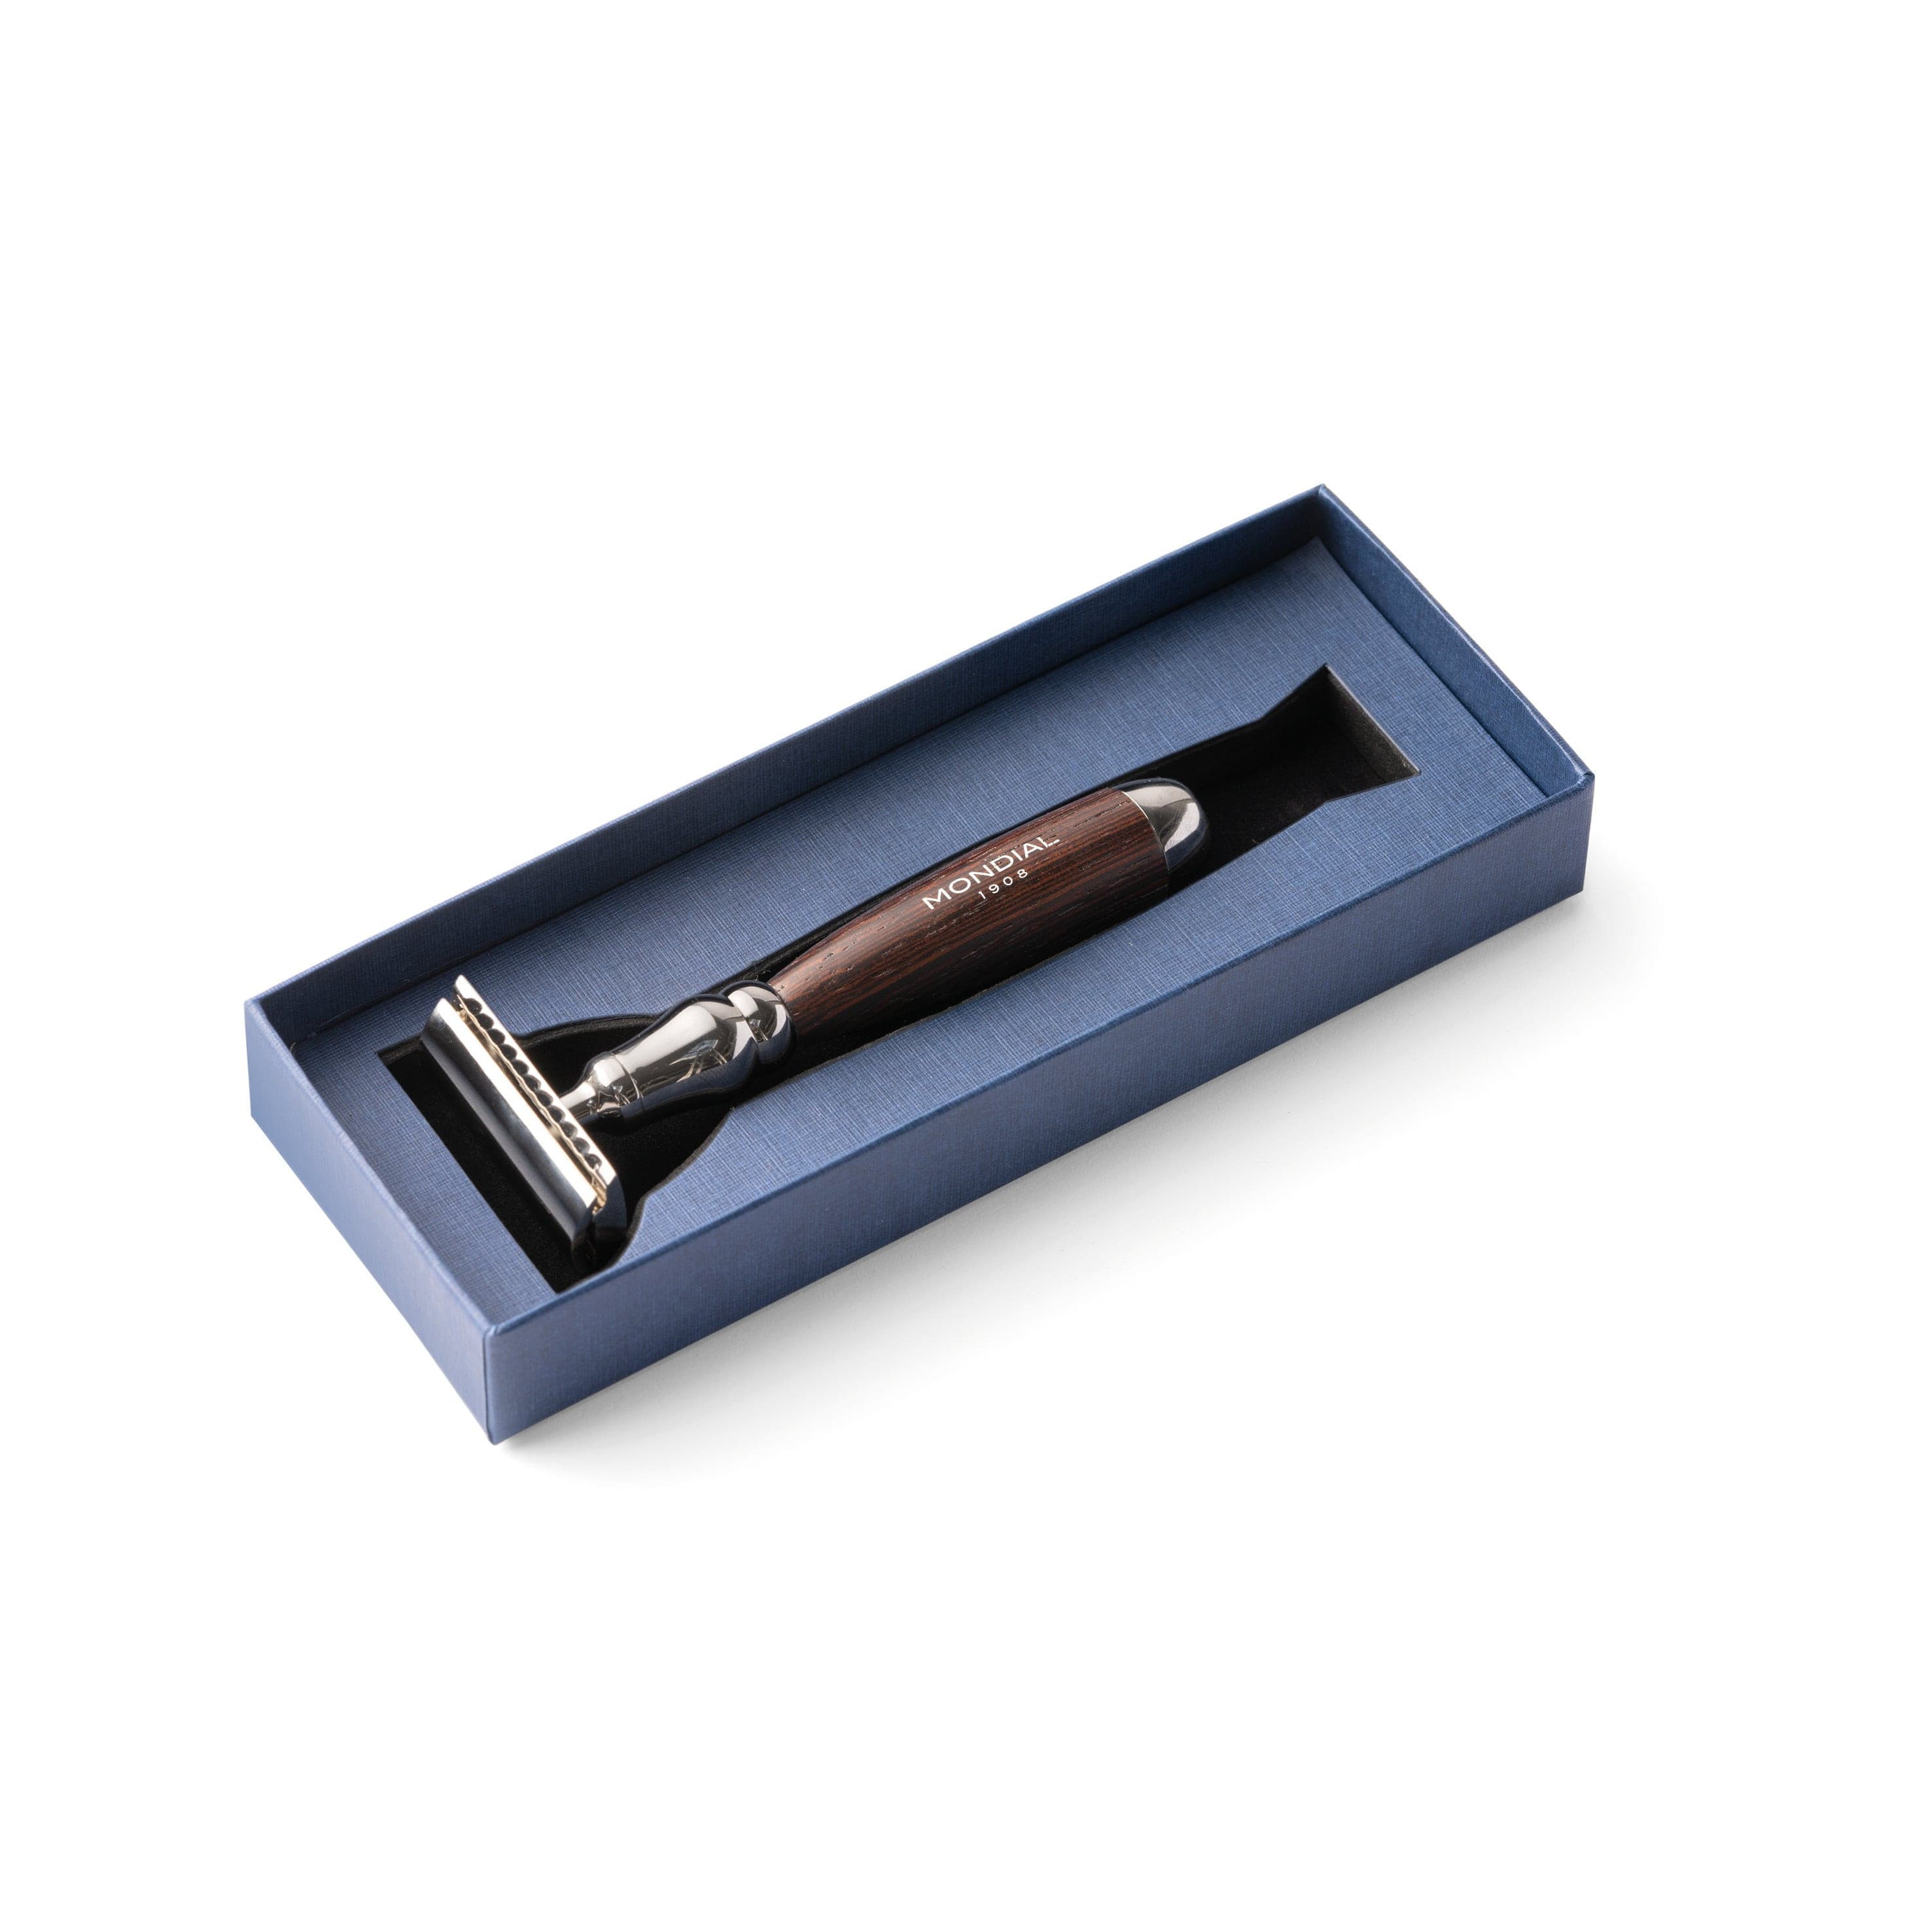 'Prestige' Safety Razor with Handle in Wengé Wood.